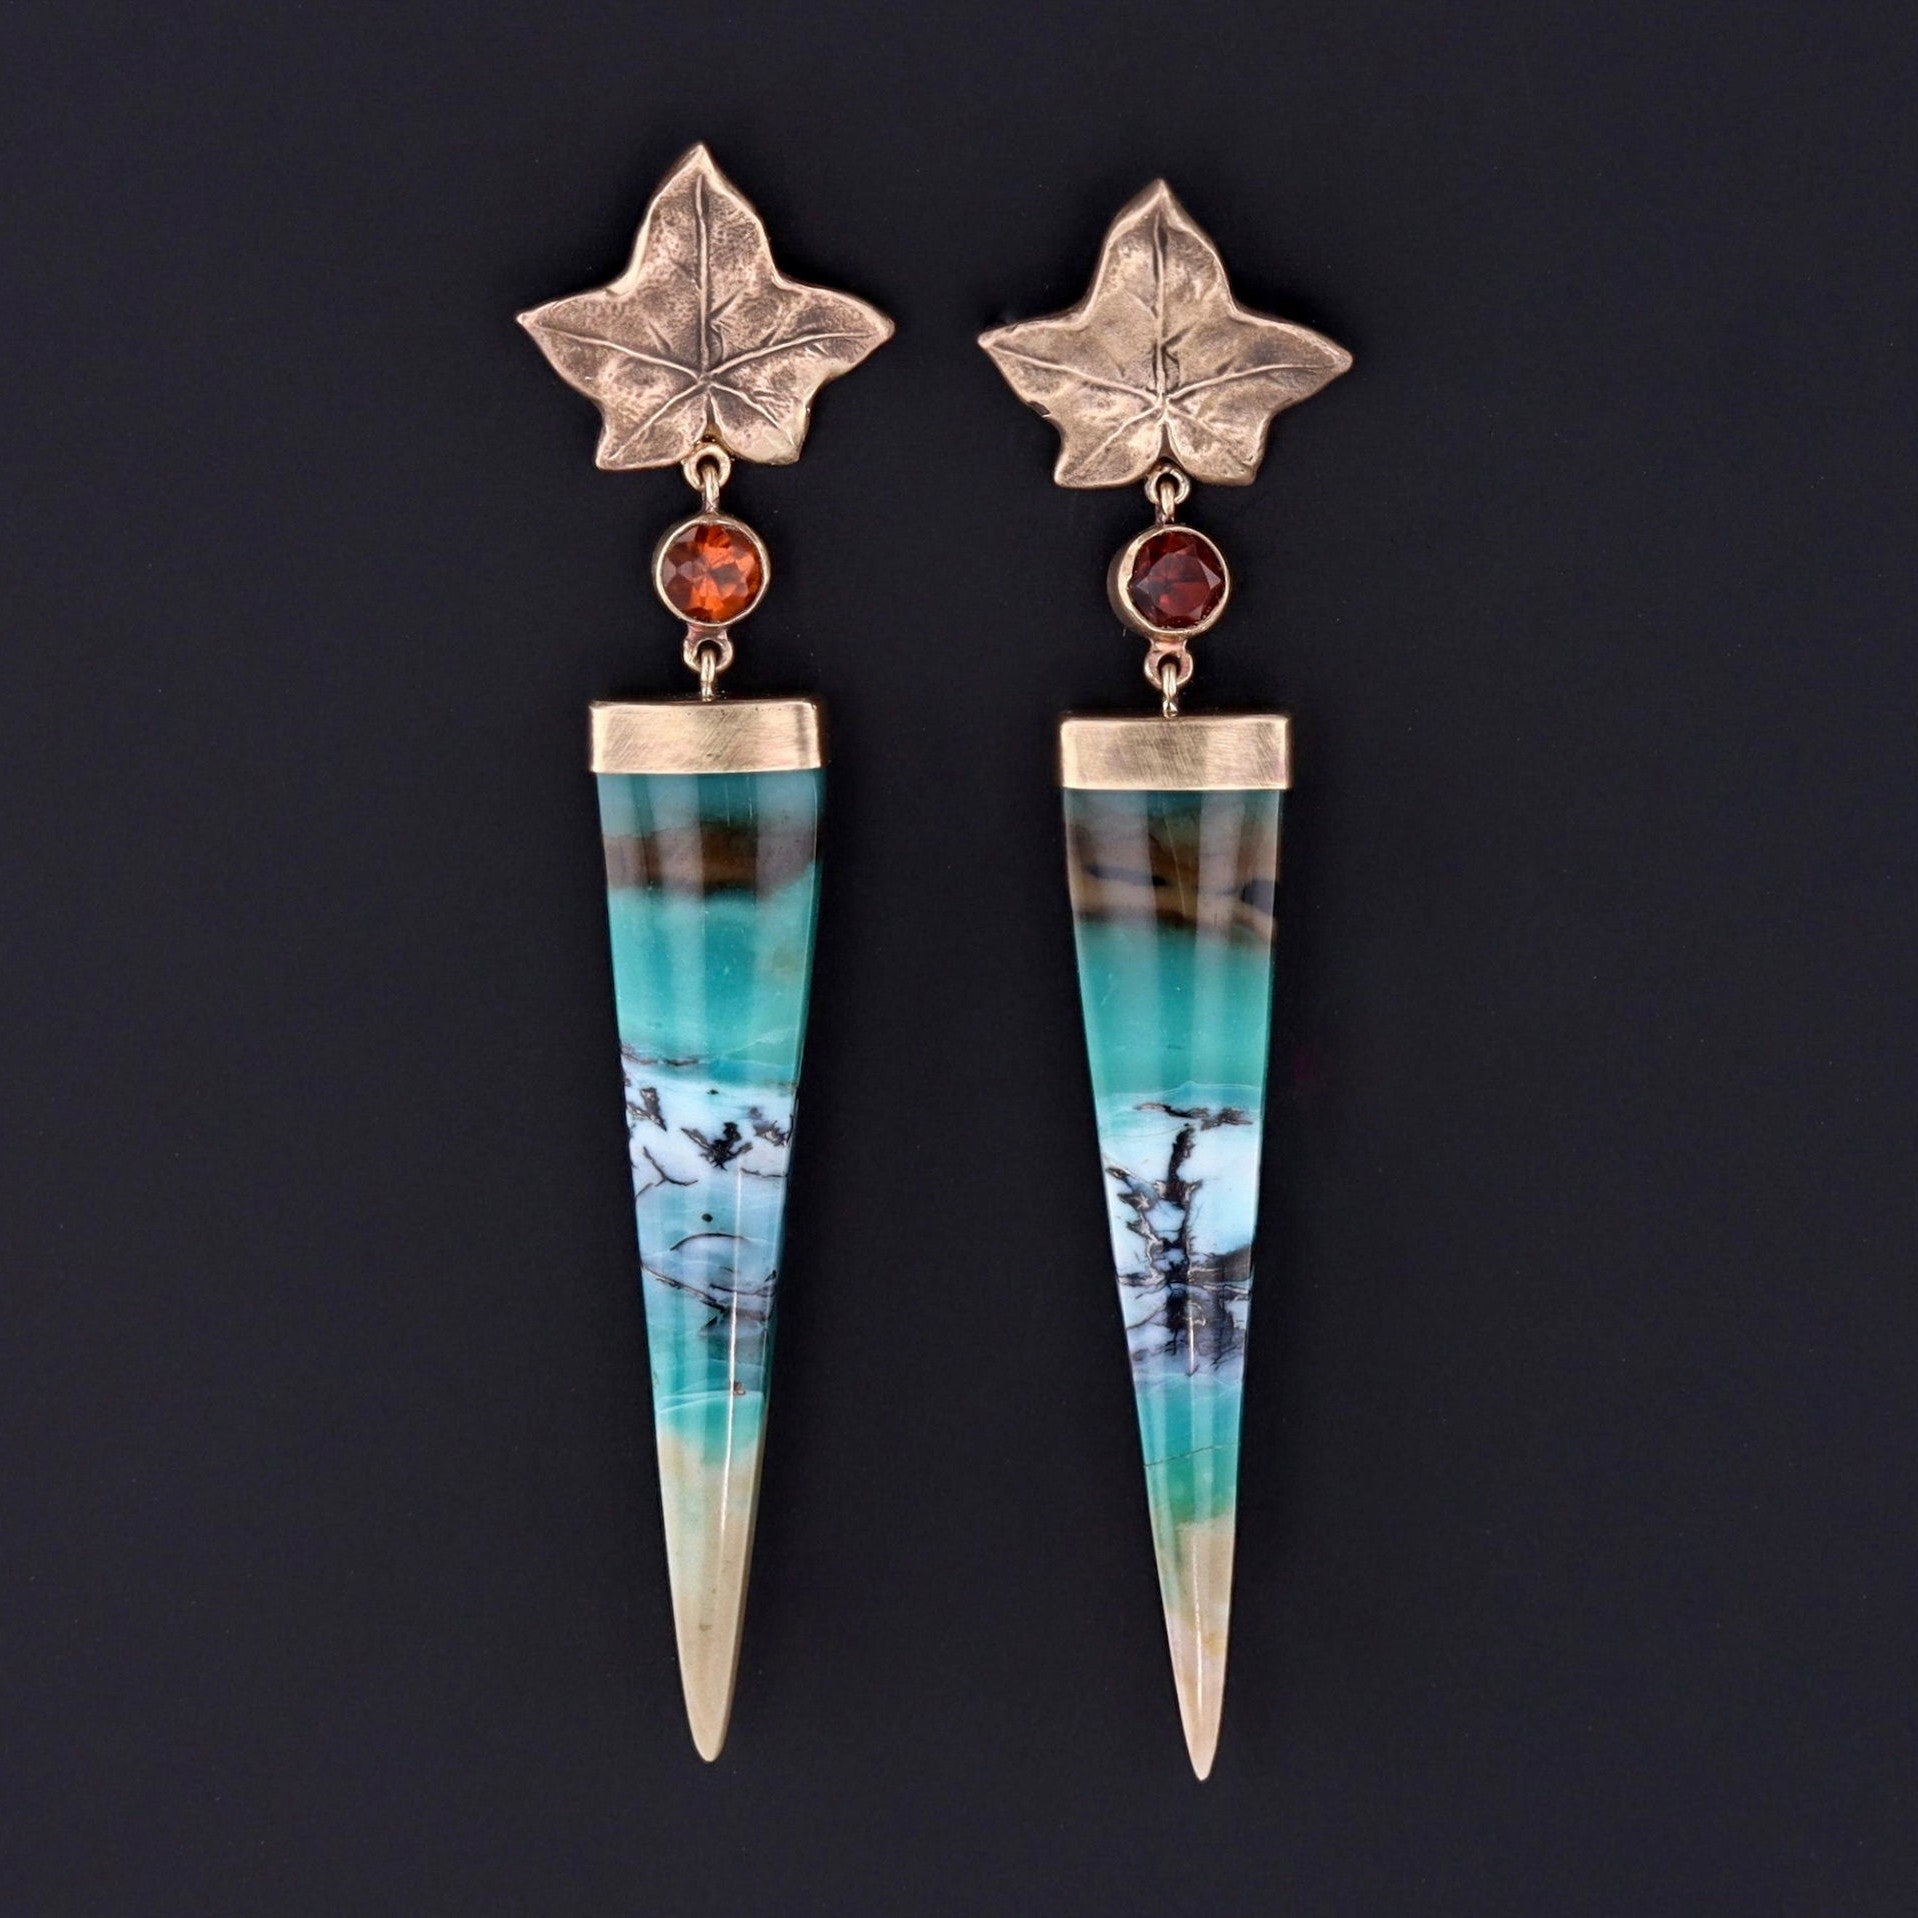 Ivy Earrings of Petrified Opalized Wood and 14k Gold